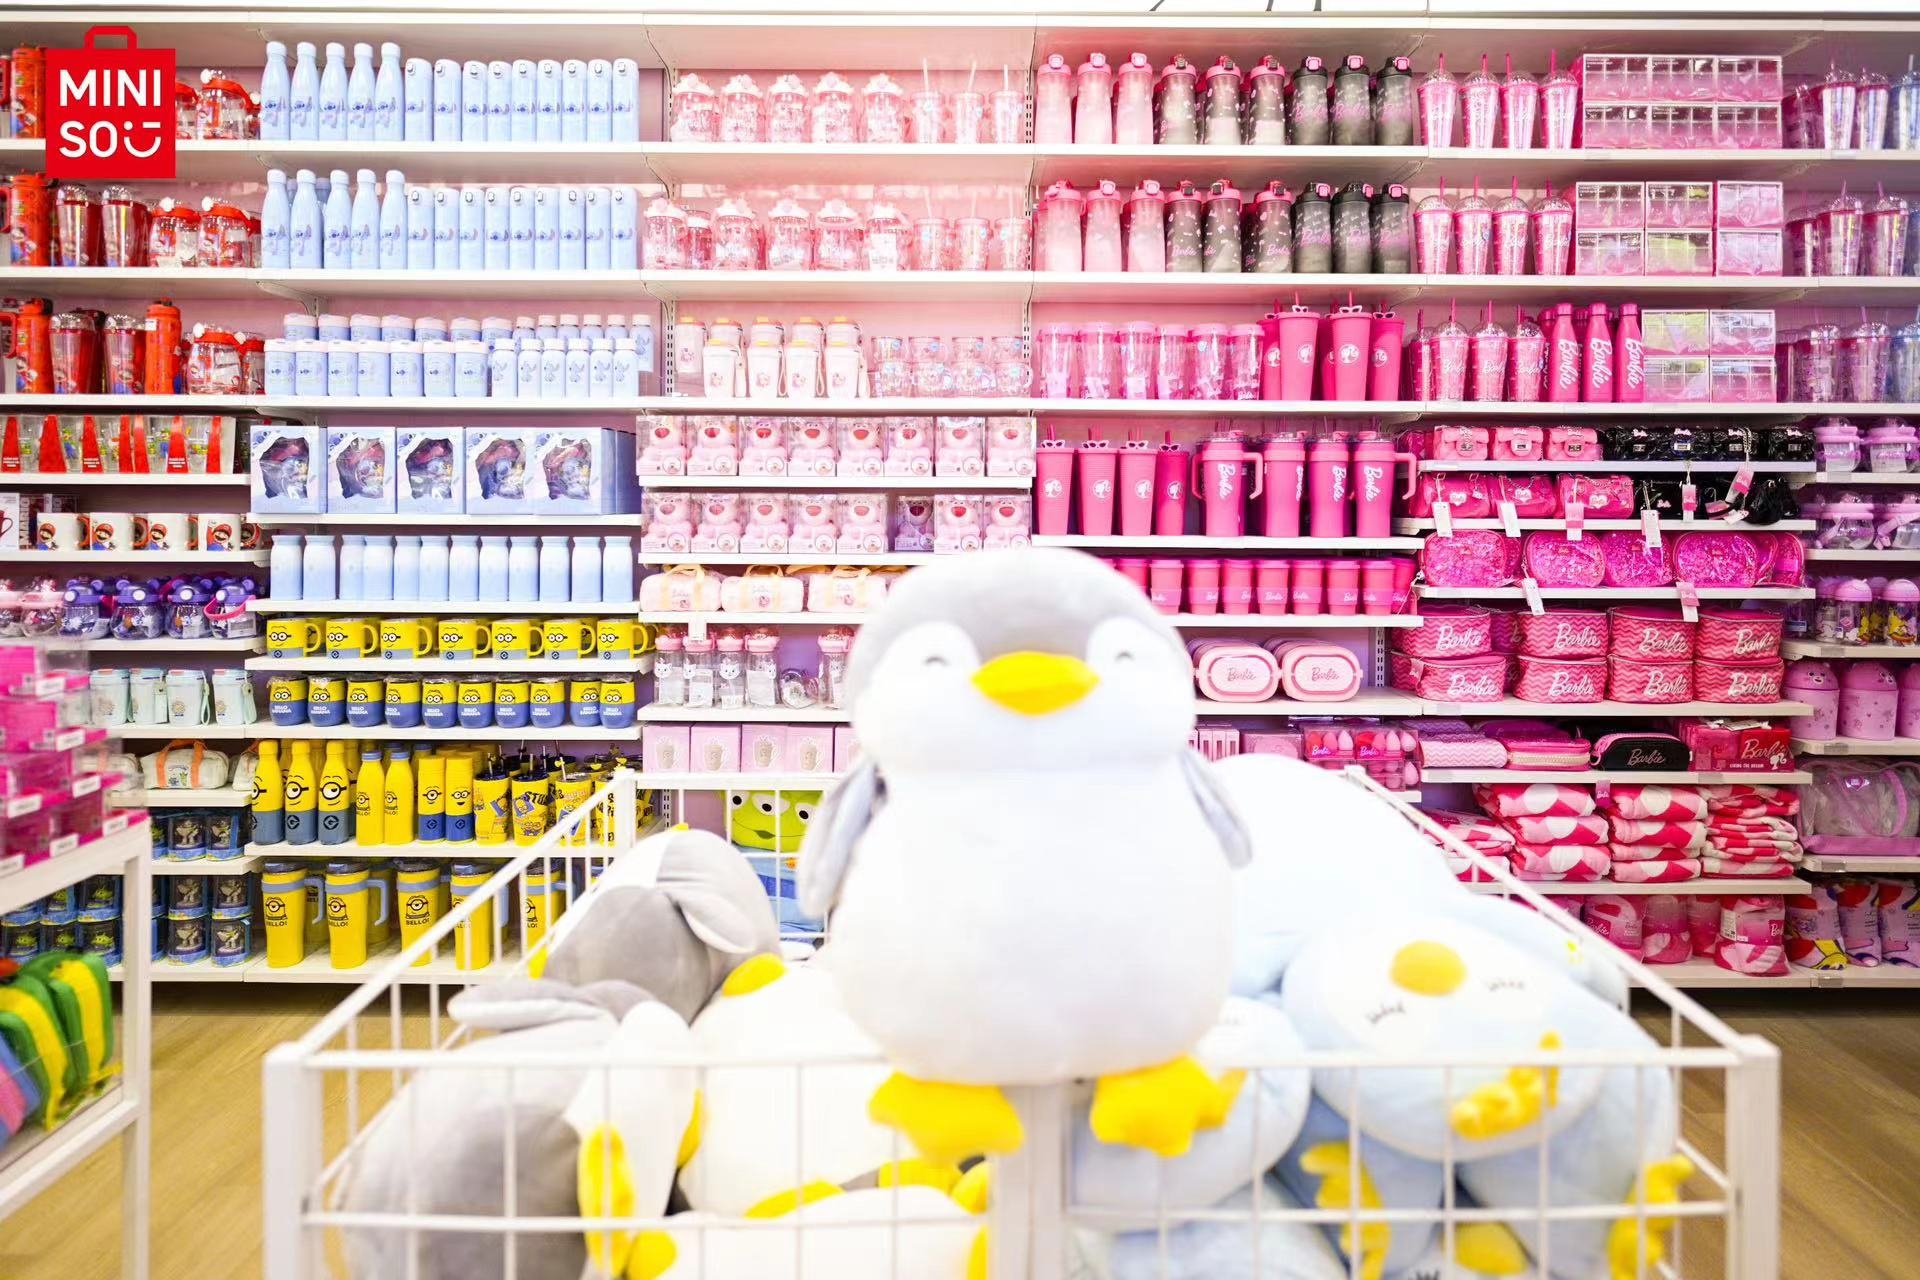 Miniso’s beloved IPs, including Barbie, Disney, and Minions, are segmented into different IP zones. Photo: Miniso